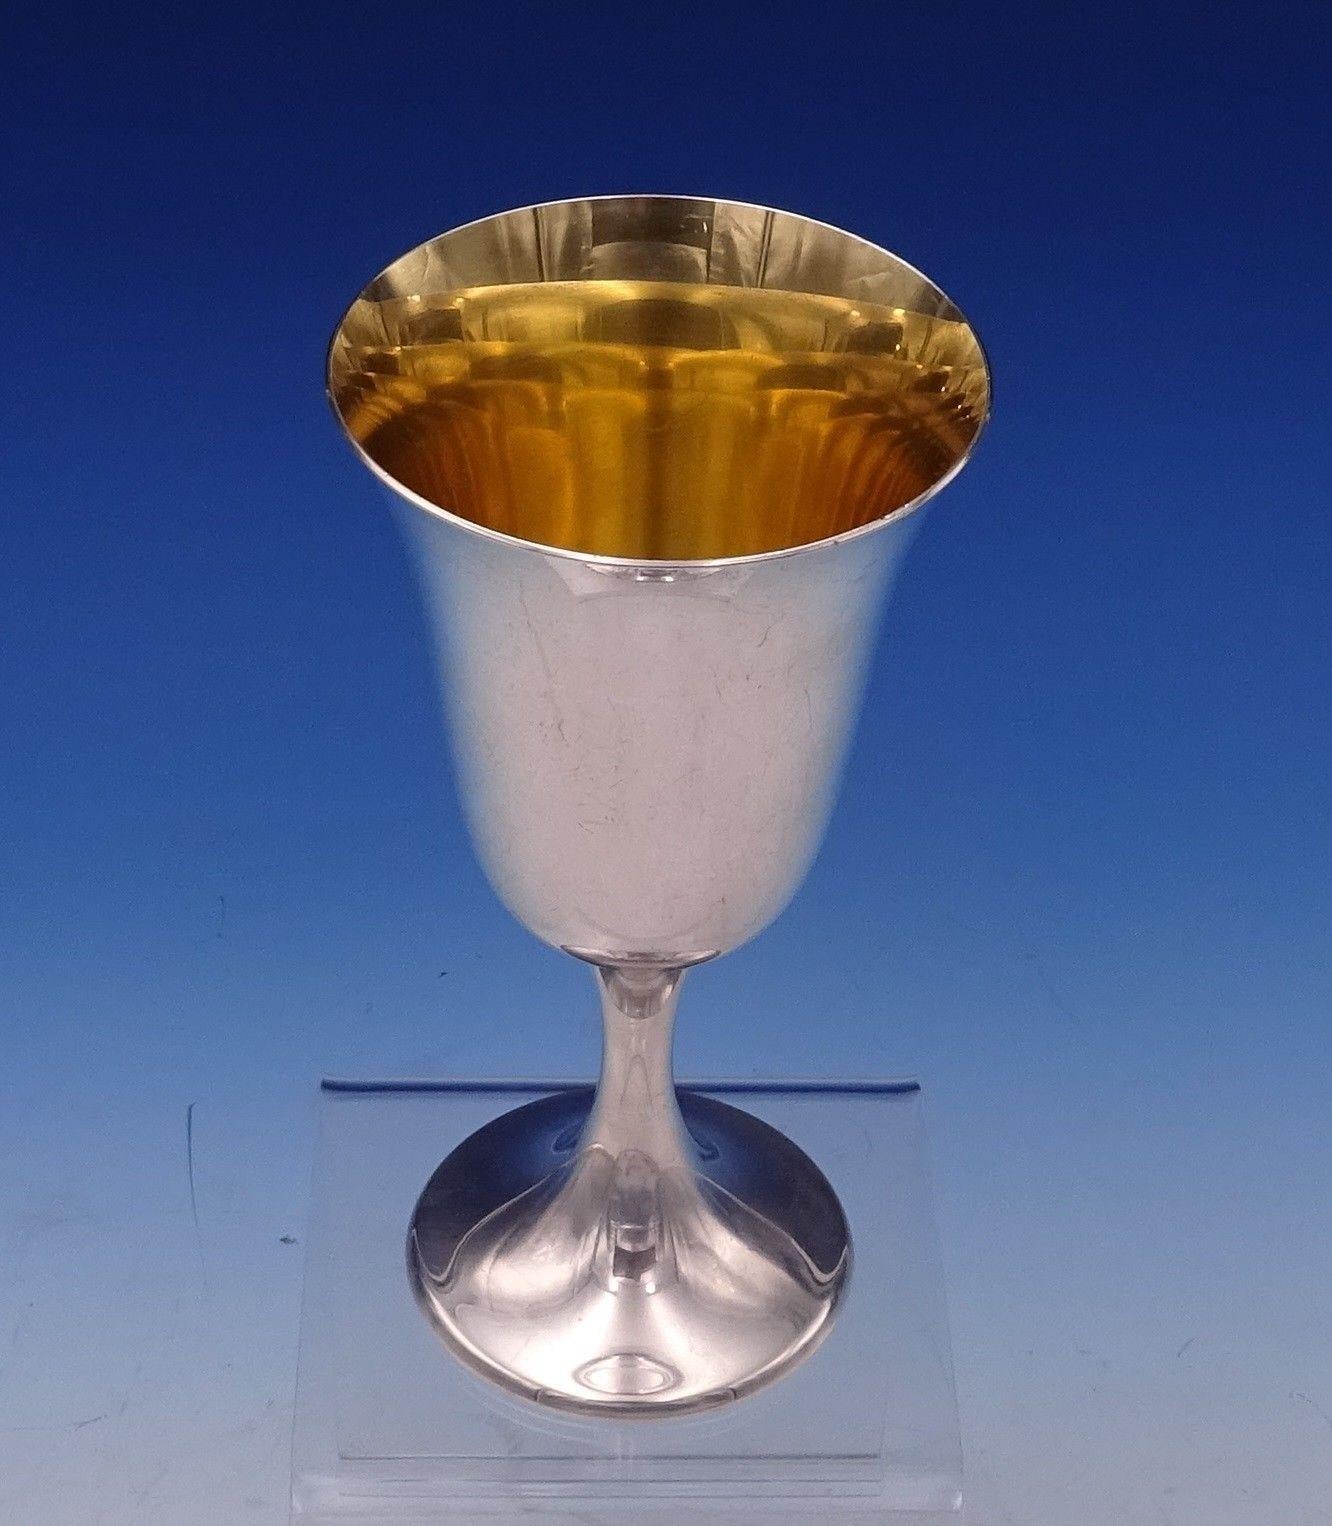 Wonderful Gorham sterling silver water goblet with gold washed interior. It is marked #272. The goblet measures 3 1/4 x 6 1/2 tall and weighs 6.25 troy ounces. It is not monogrammed and is in excellent condition. Marvellous!
